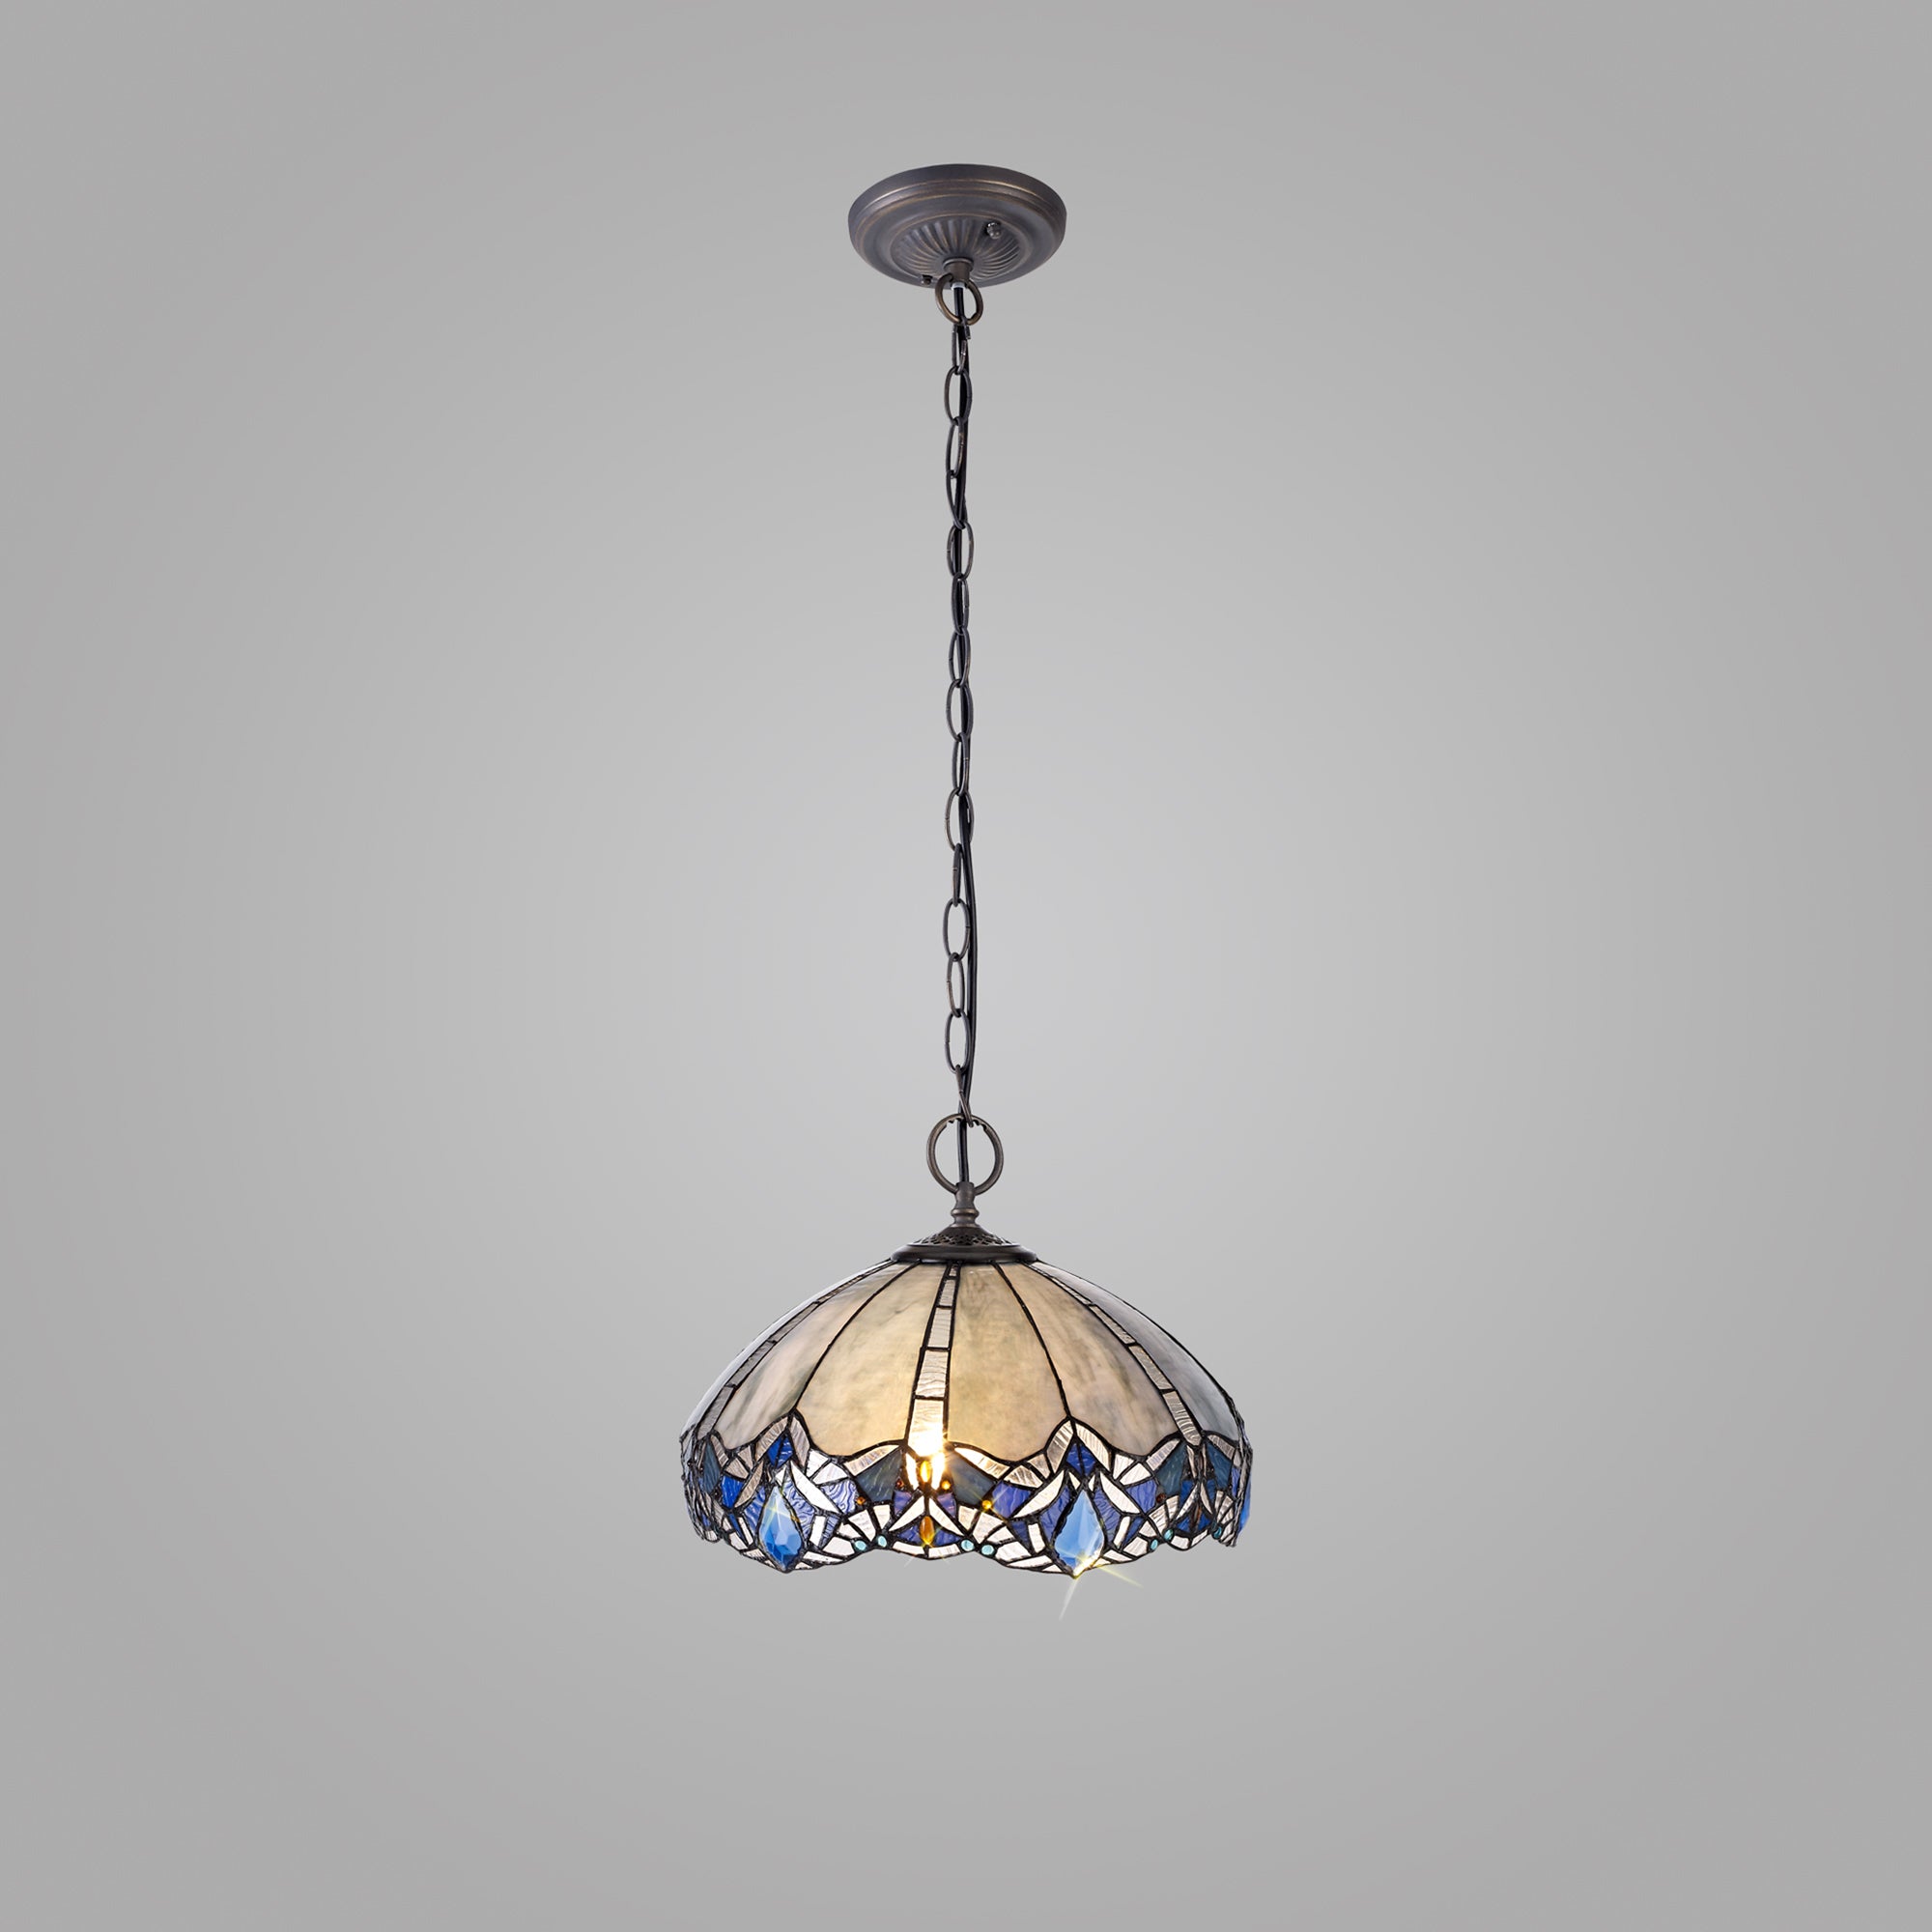 Oksana 2/3 Light Centre Ceiling Downlight E27 With Medium/Large Tiffany Shade, Blue & Clear Crystal & Aged Antique Brass